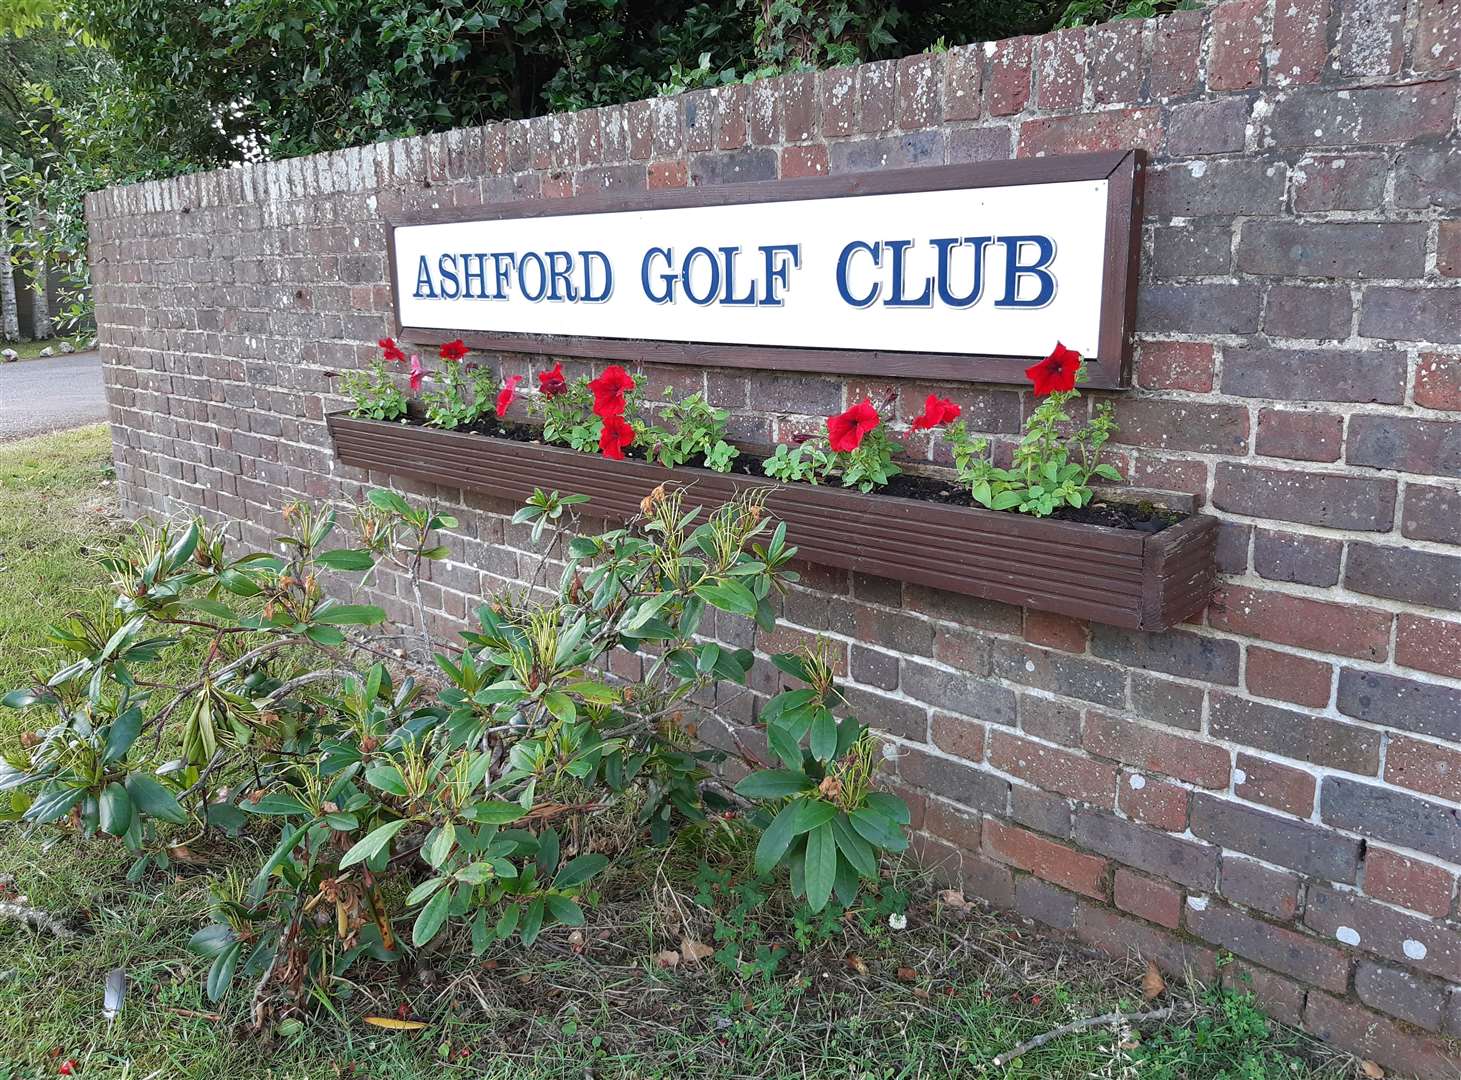 Ashford Golf Club bosses say they have no plans to move home